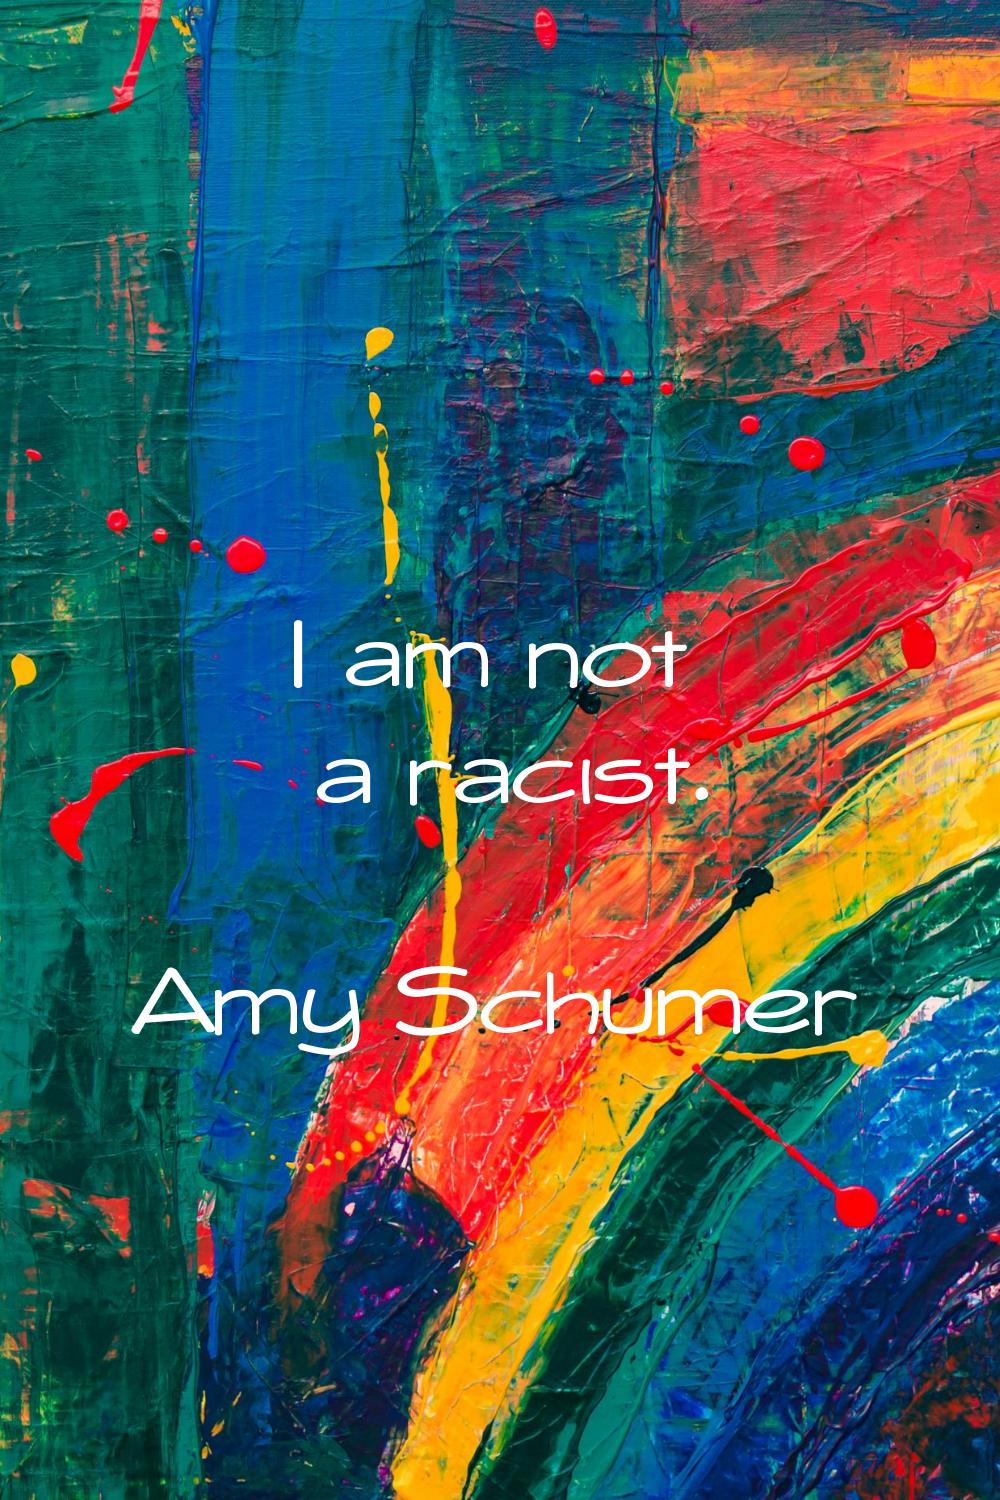 I am not a racist.